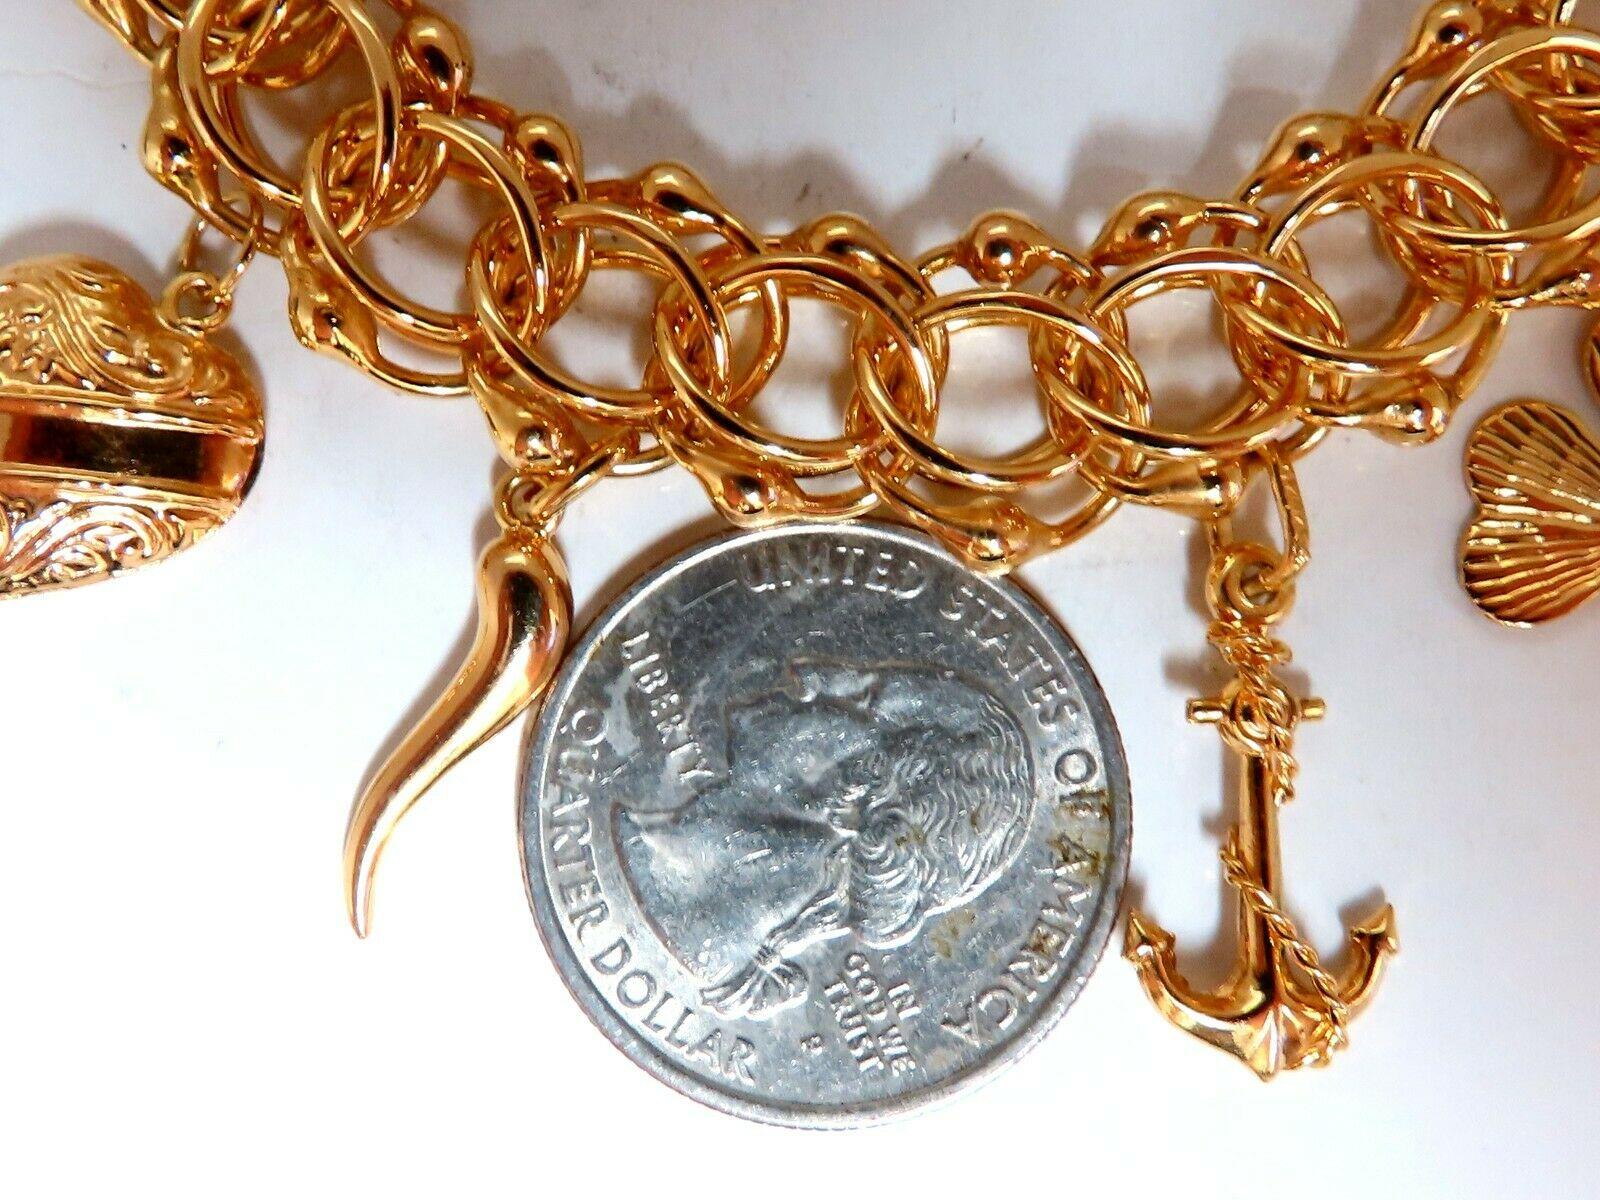 GORGEOUS CHARM BRACELET


10 Statement charms. 

40 grams
14kt yellow gold.

7.5 inches

.50 inch wide caliber

Safety chain & Pressure clasp.